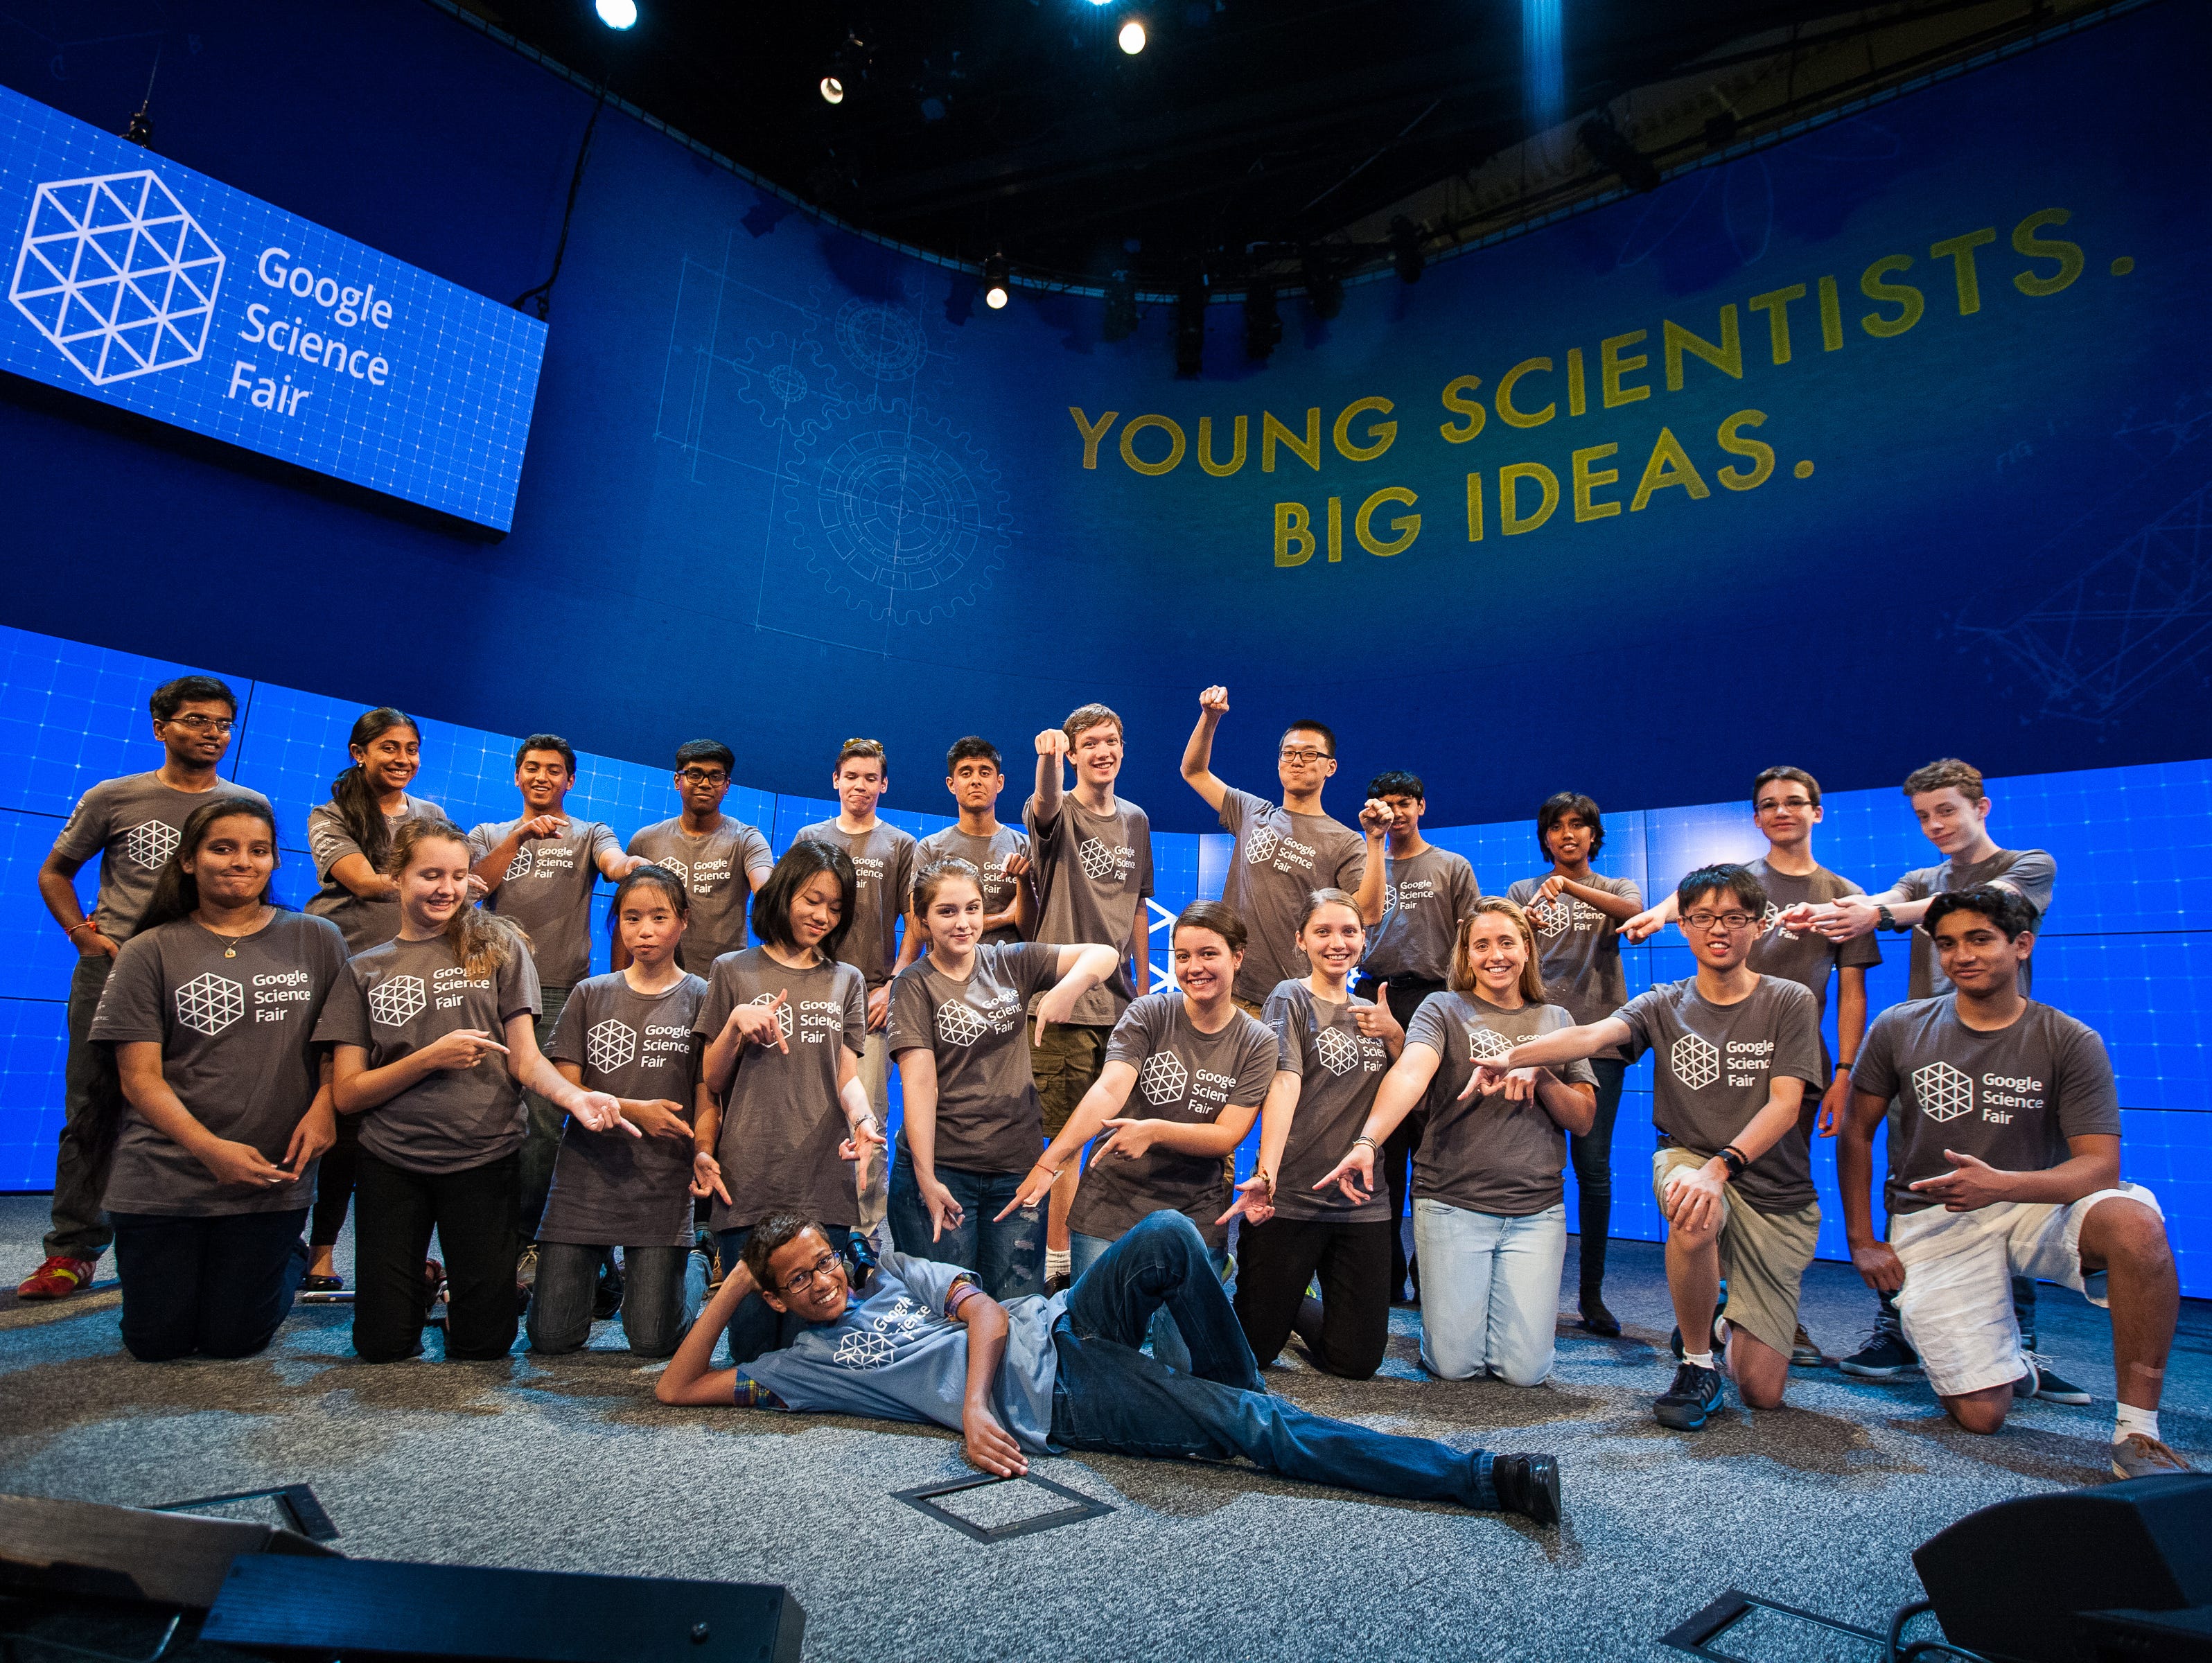 The 20 finalists in the Google Science Fair got to meet another young scientist on Monday: Ahmed Mohamed.